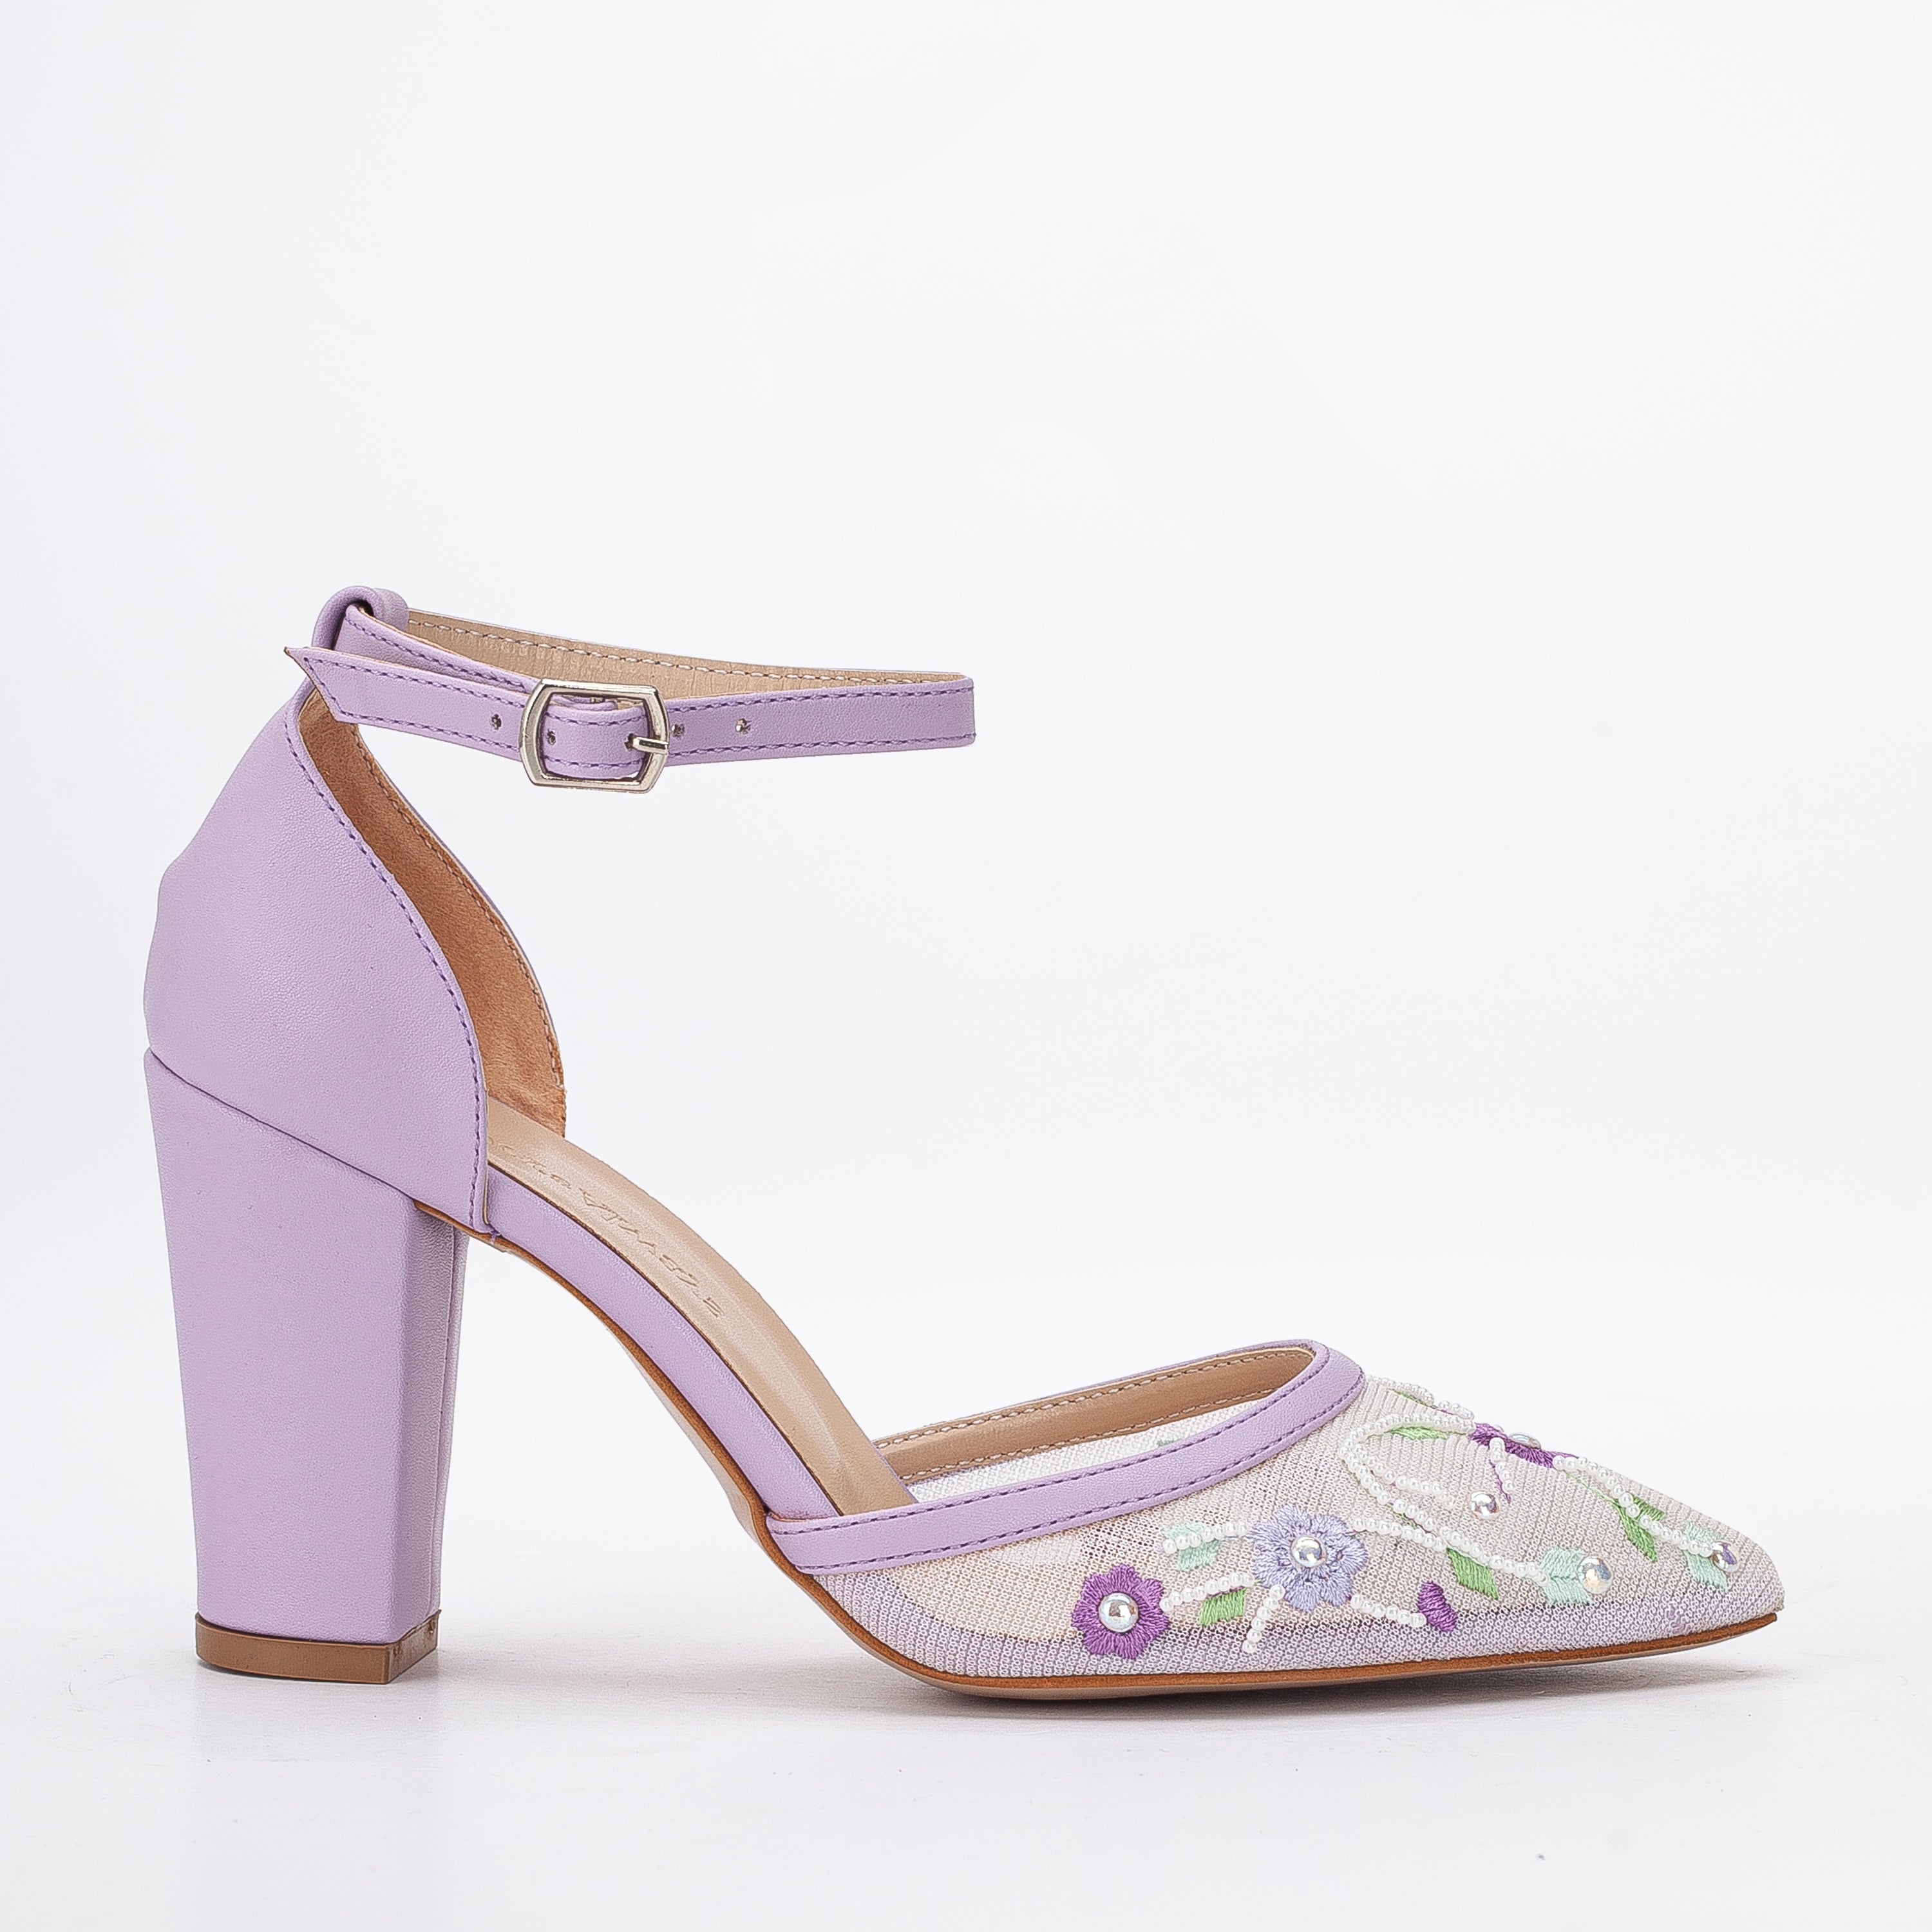 Lavender embroidered high heels, Embroidered lavender heels, Lavender floral embroidered heels, Lavender embellished high heels, Lavender heels with intricate embroidery, Lavender embroidered stilettos, Lavender embroidered pumps, Lavender high heels with delicate embroidery, Lavender embroidered wedding heels, Lavender embroidered bridal shoes.